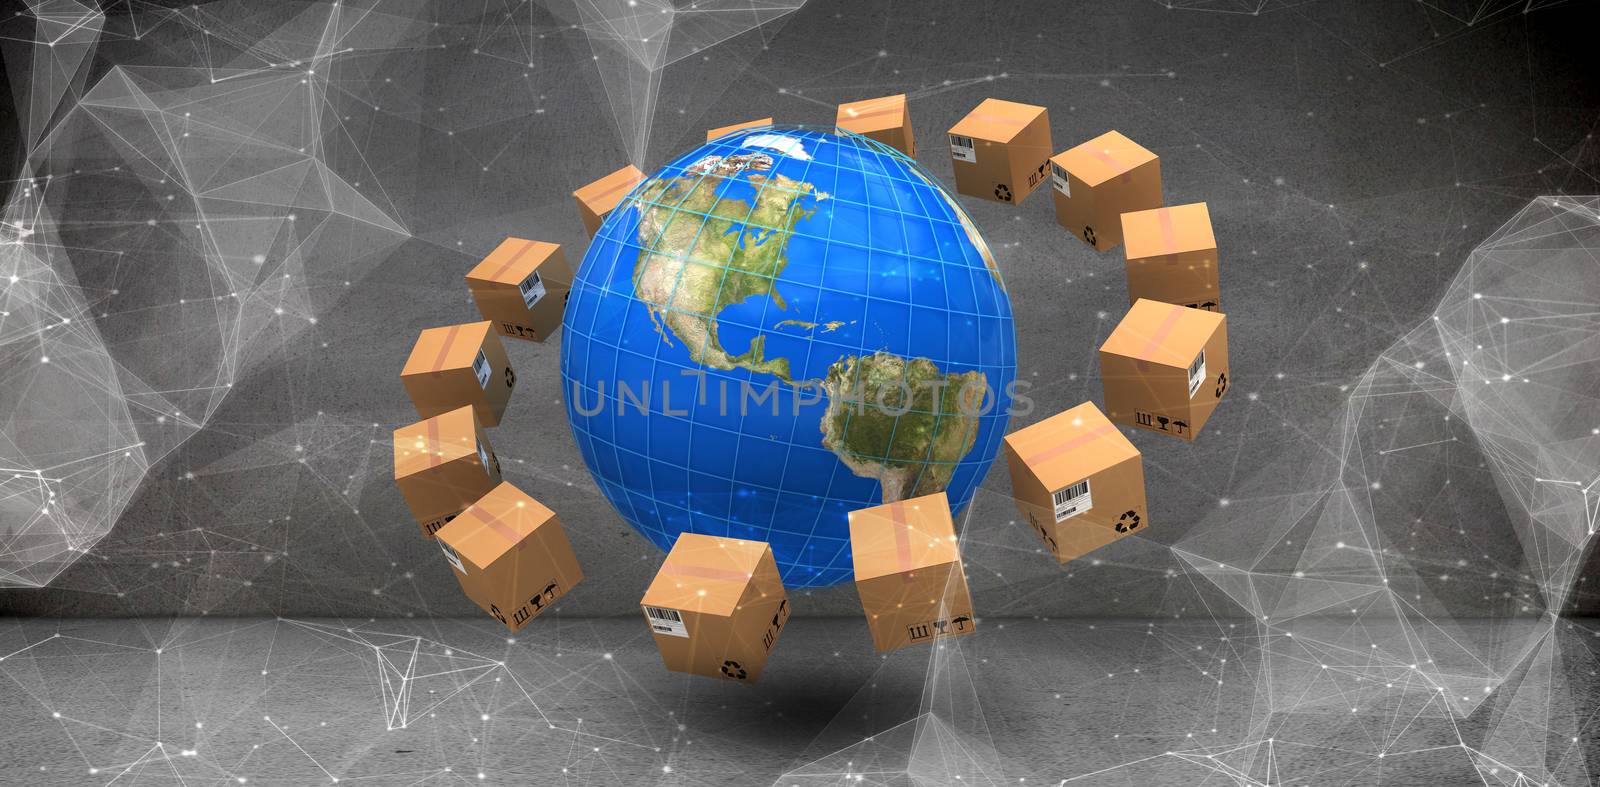 Composite image of globe amidst cardboard boxes by Wavebreakmedia